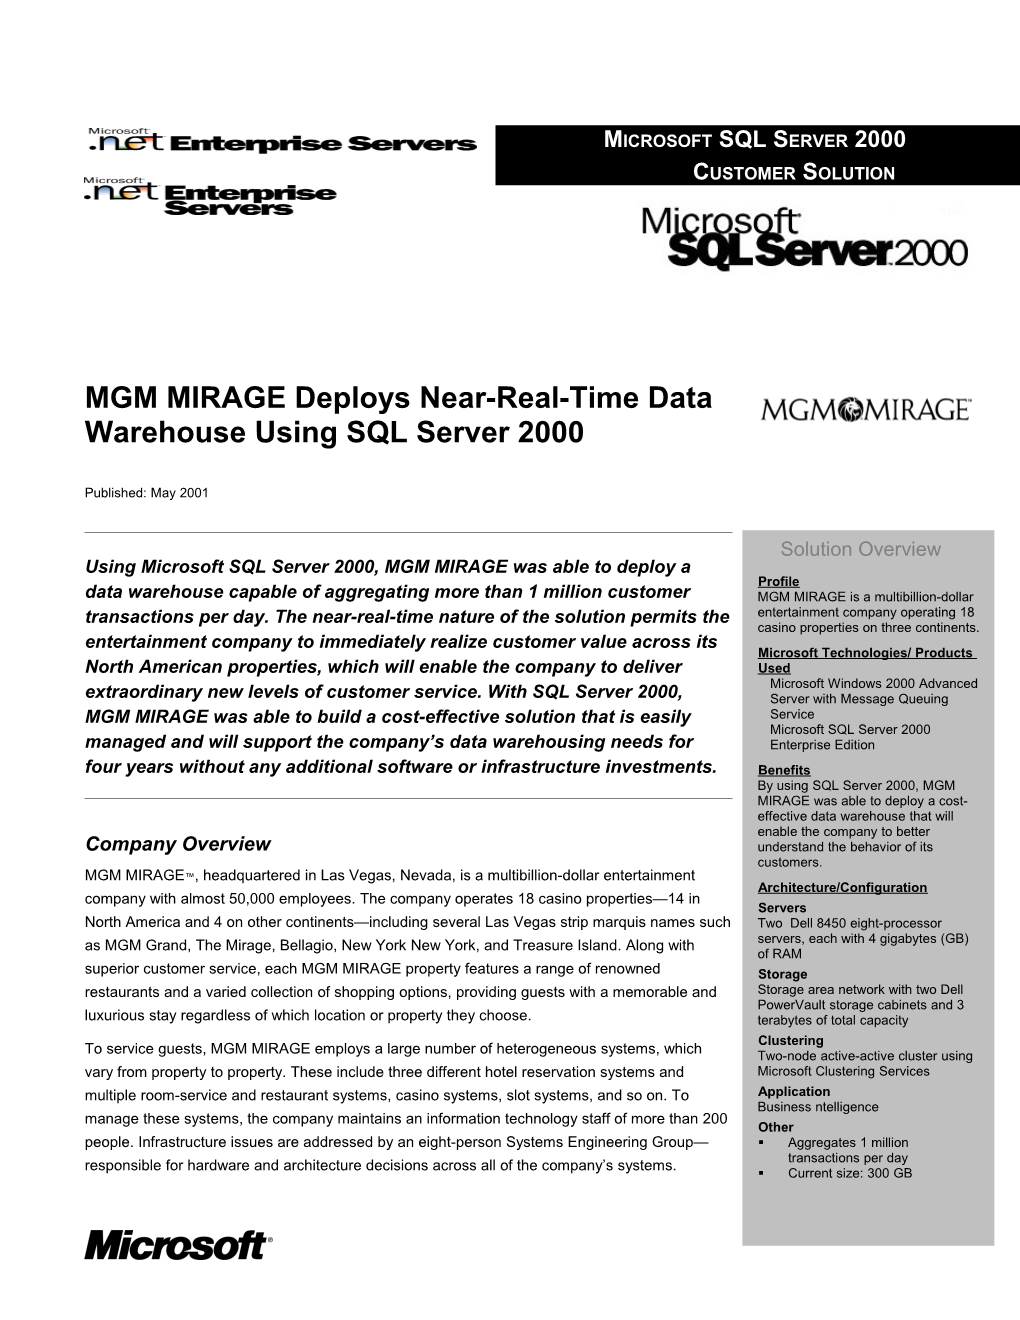 Using Microsoft SQL Server 2000, MGM MIRAGE Was Able to Deploy a Data Warehouse Capable